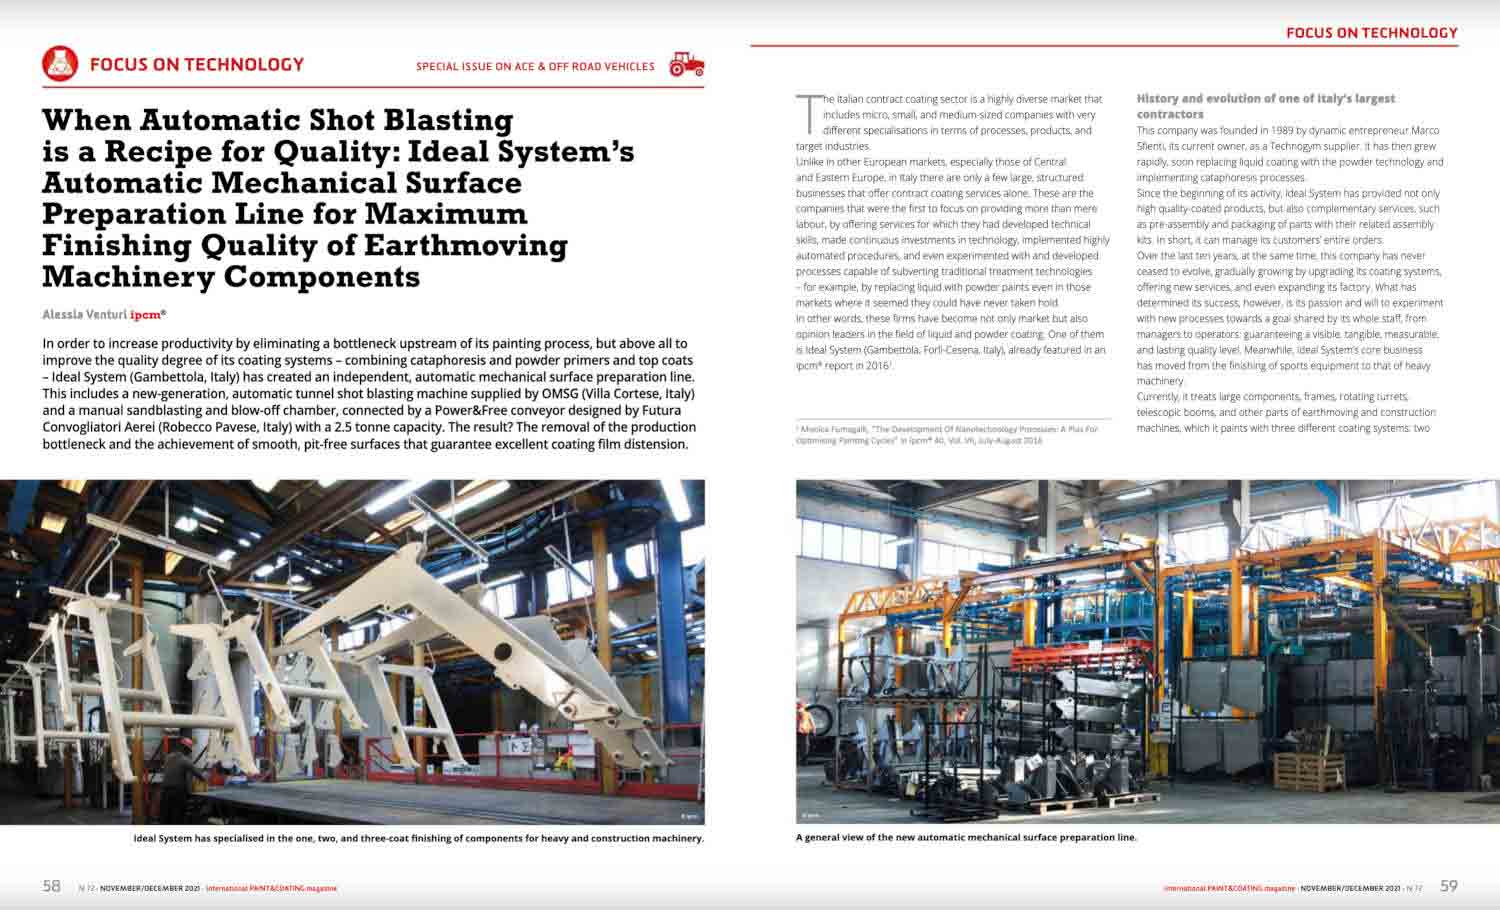 When Automatic Shot Blasting is a Recipe for Quality: a case study with Ideal System